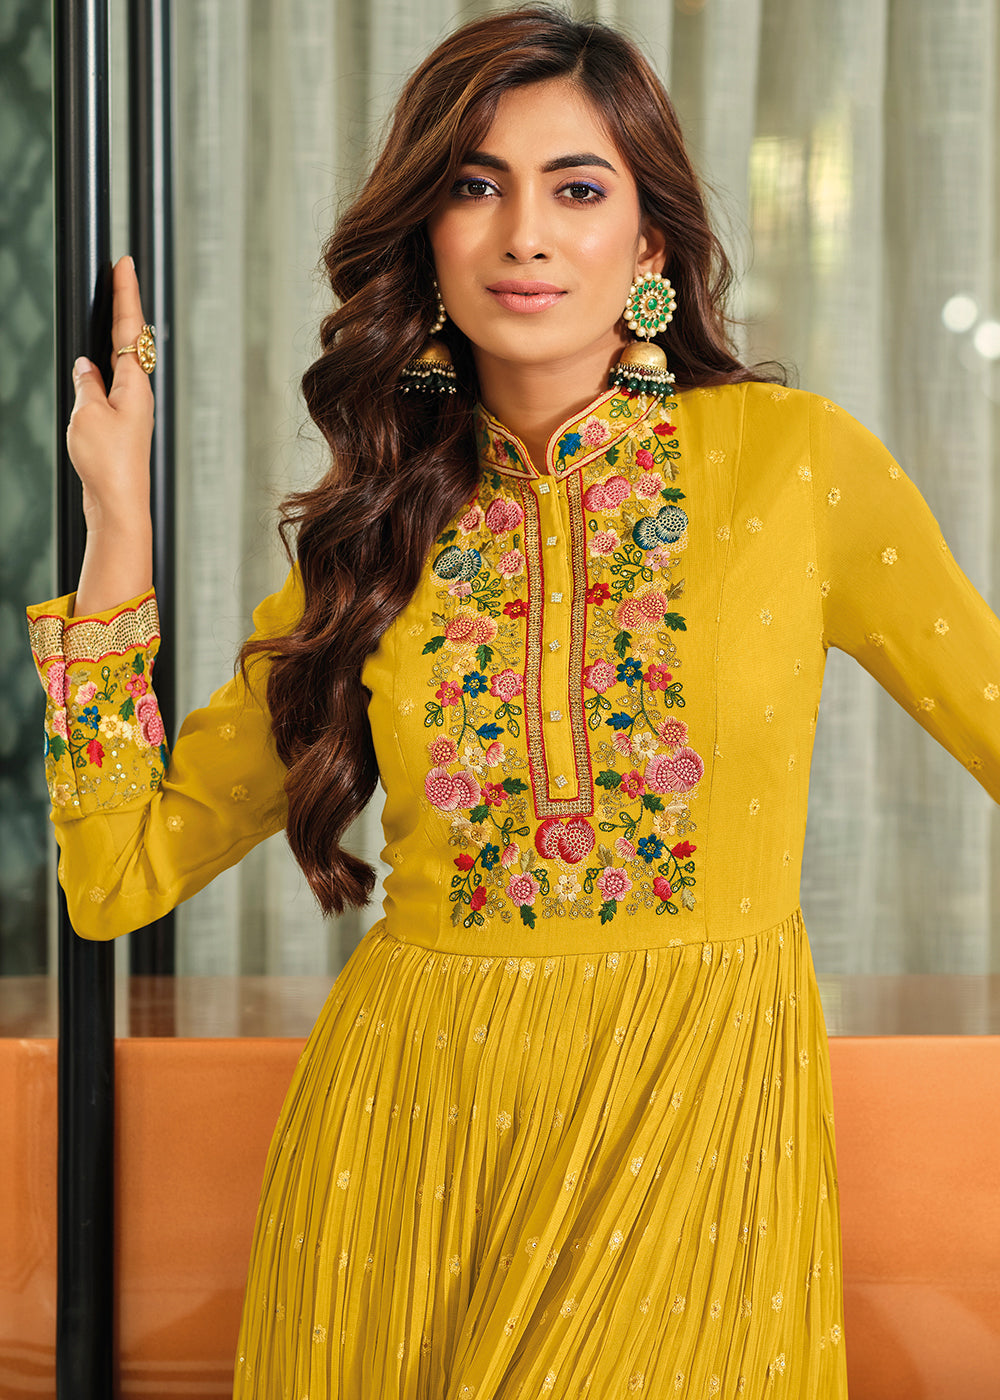 Buy Now Mustard Yellow Flower Embroidered Georgette Anarkali Dress Online in USA, UK, Australia, New Zealand, Canada & Worldwide at Empress Clothing.